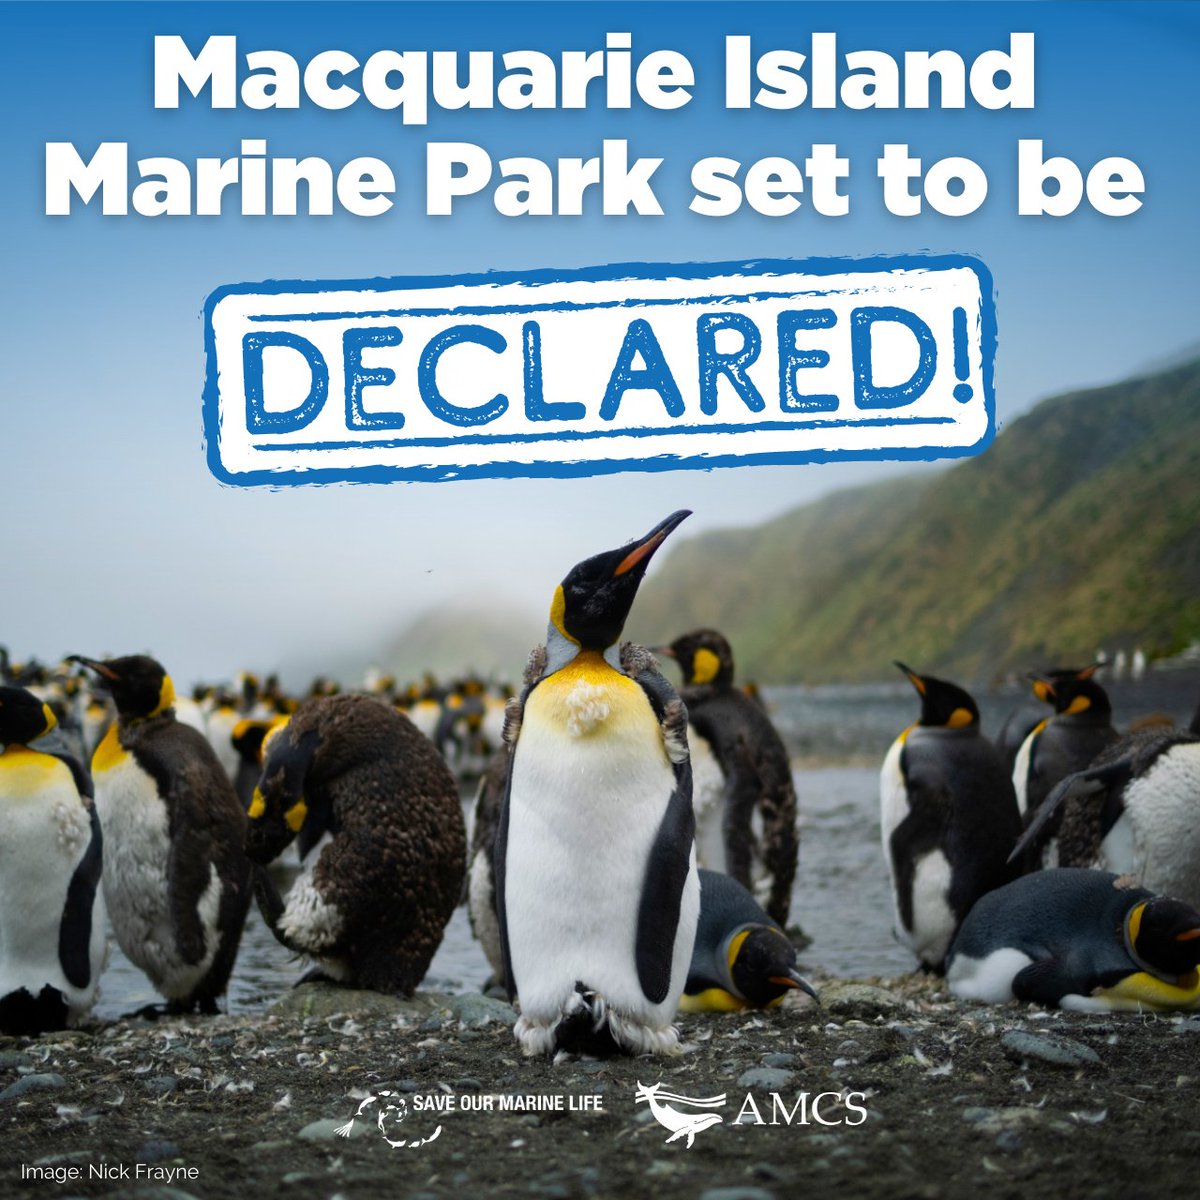 Great news on #WorldEnvironmentDay #ausgov agreed to expand #MacquarieIslandMarinePark! An area larger than Germany will be marine sanctuary, the strongest level of protection possible 🐧🦭🐦@SaveOurMarine THANK YOU @TanyaPlibersek @AnthonyAlbanese gov. & our supporters!